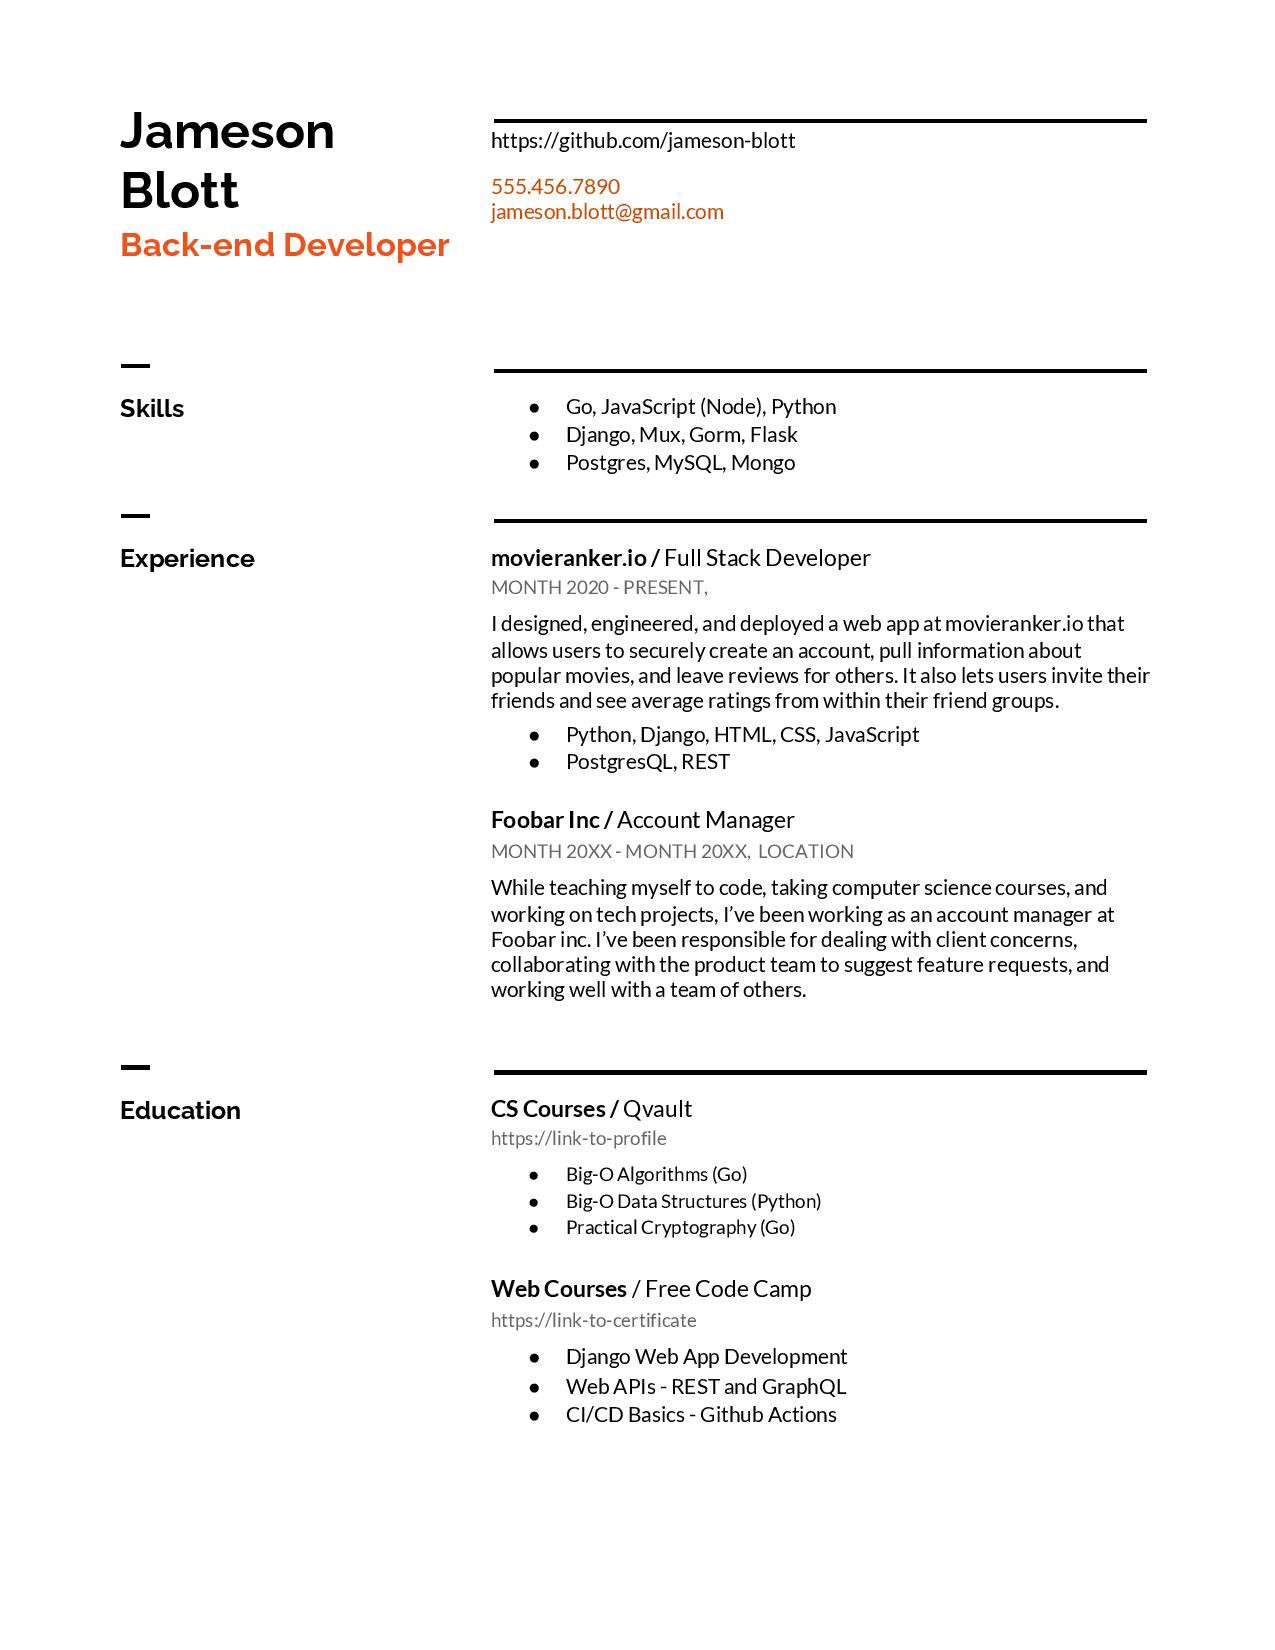 Sample Computer Science Resume Entry Level 6 Computer Science Resume Examples for 2021 by Lane Wagner …